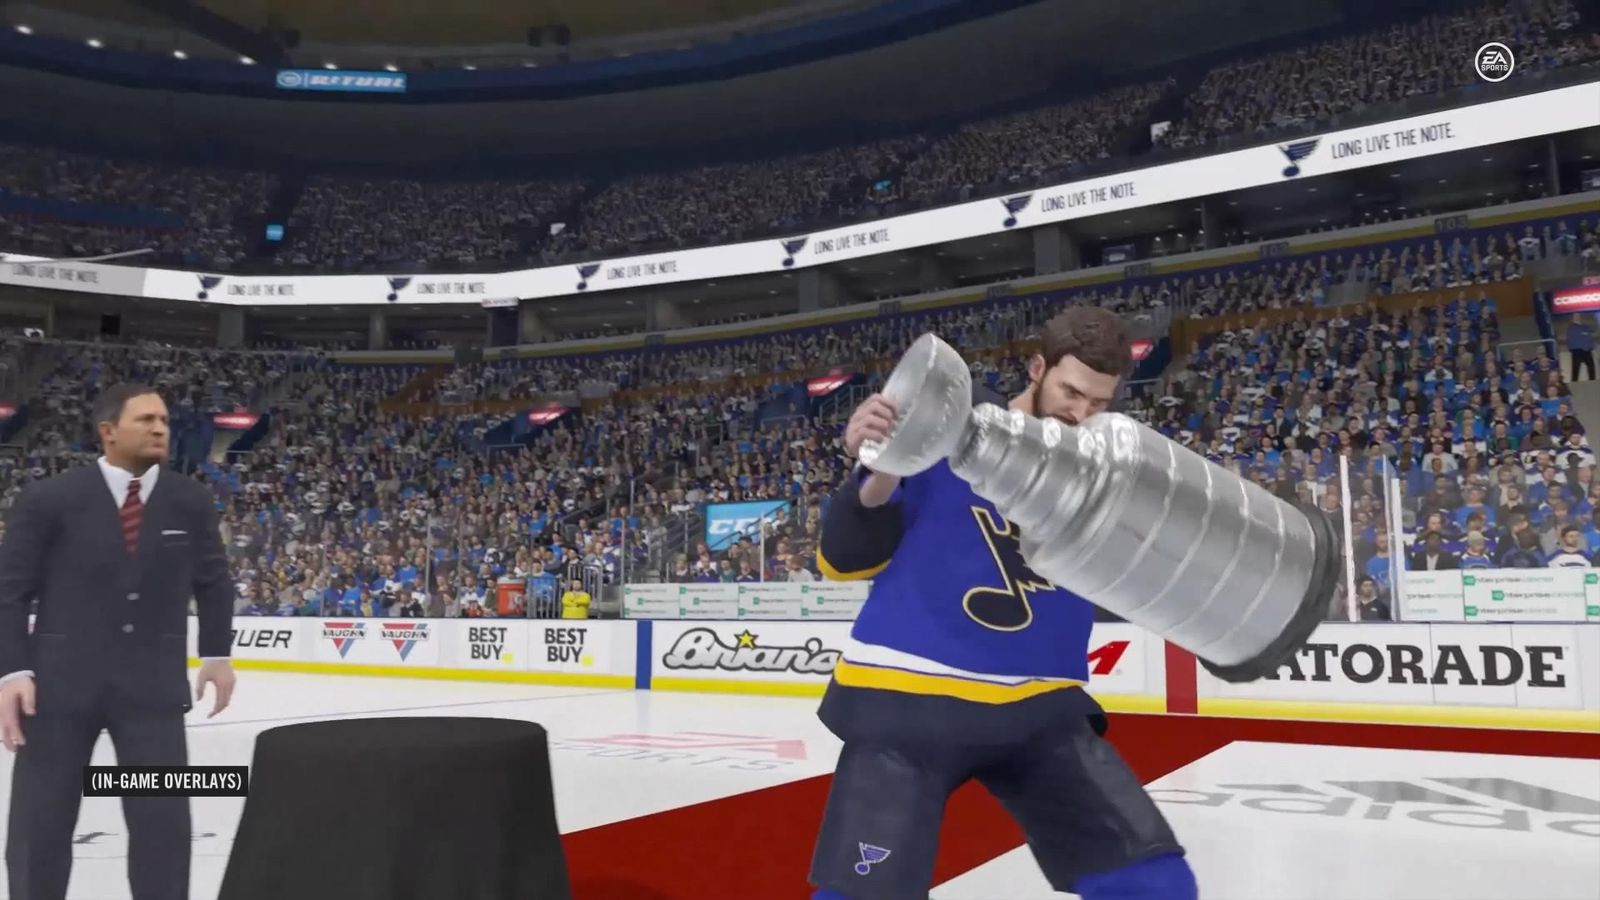 The St Louis Blues hold the Stanley Cup after winning their final playoff series.